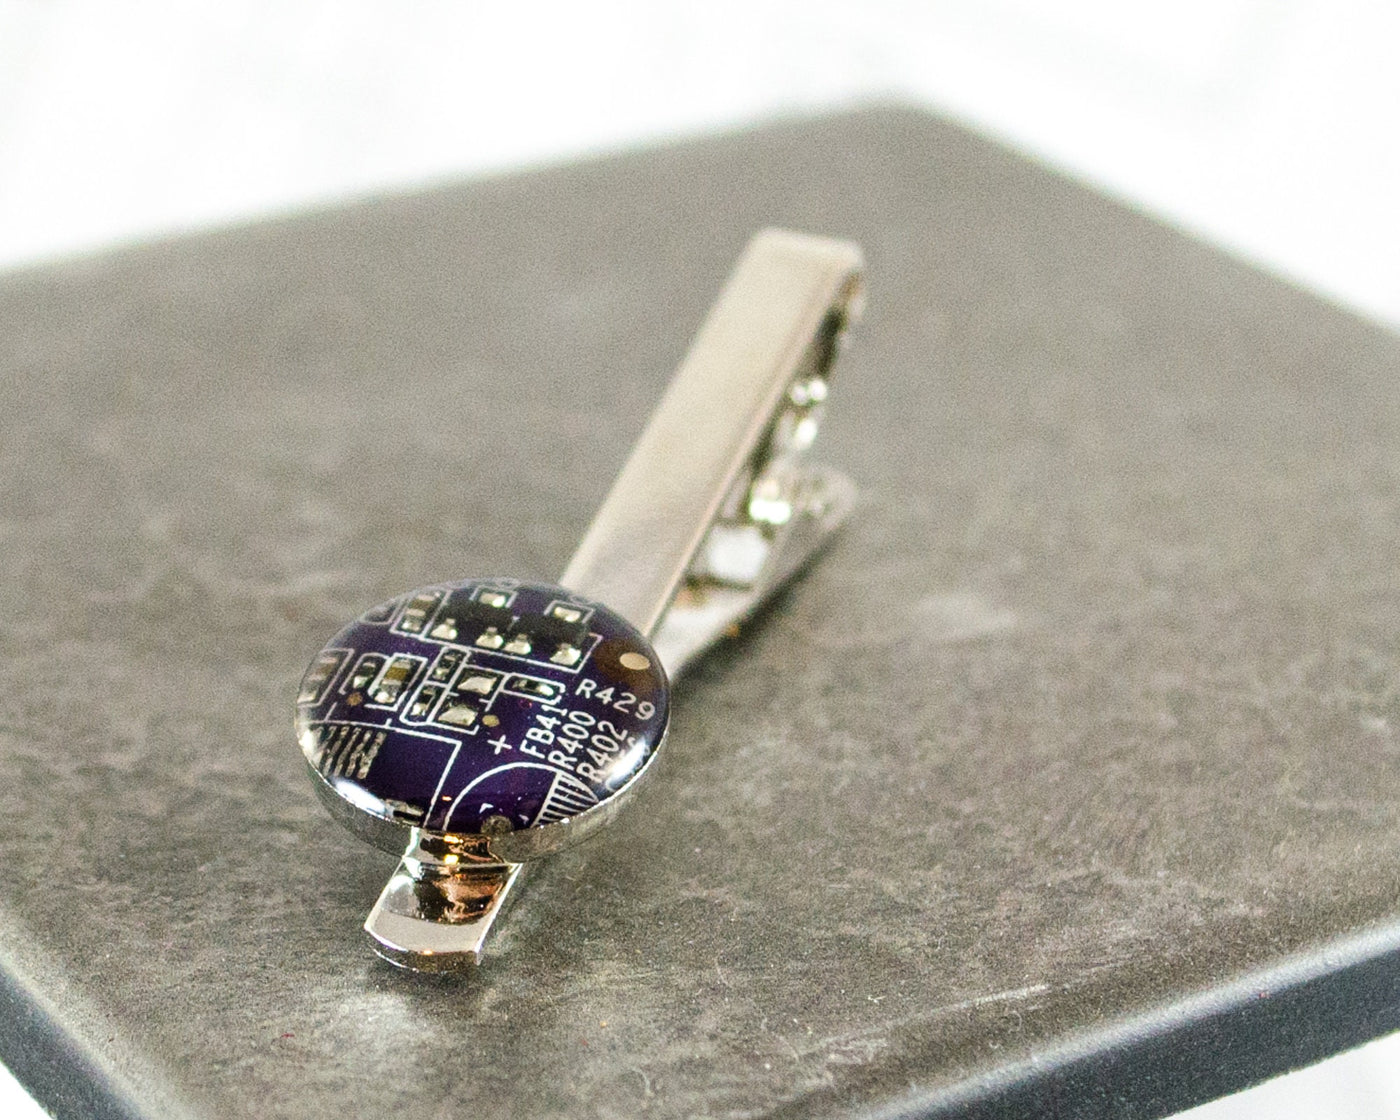 Circuit Board Tie Bar Violet, Purple Recycled Computer Tie Clip, Wearable Technology, Software Engineer Gift, Techie Accessories, Geeky Gift